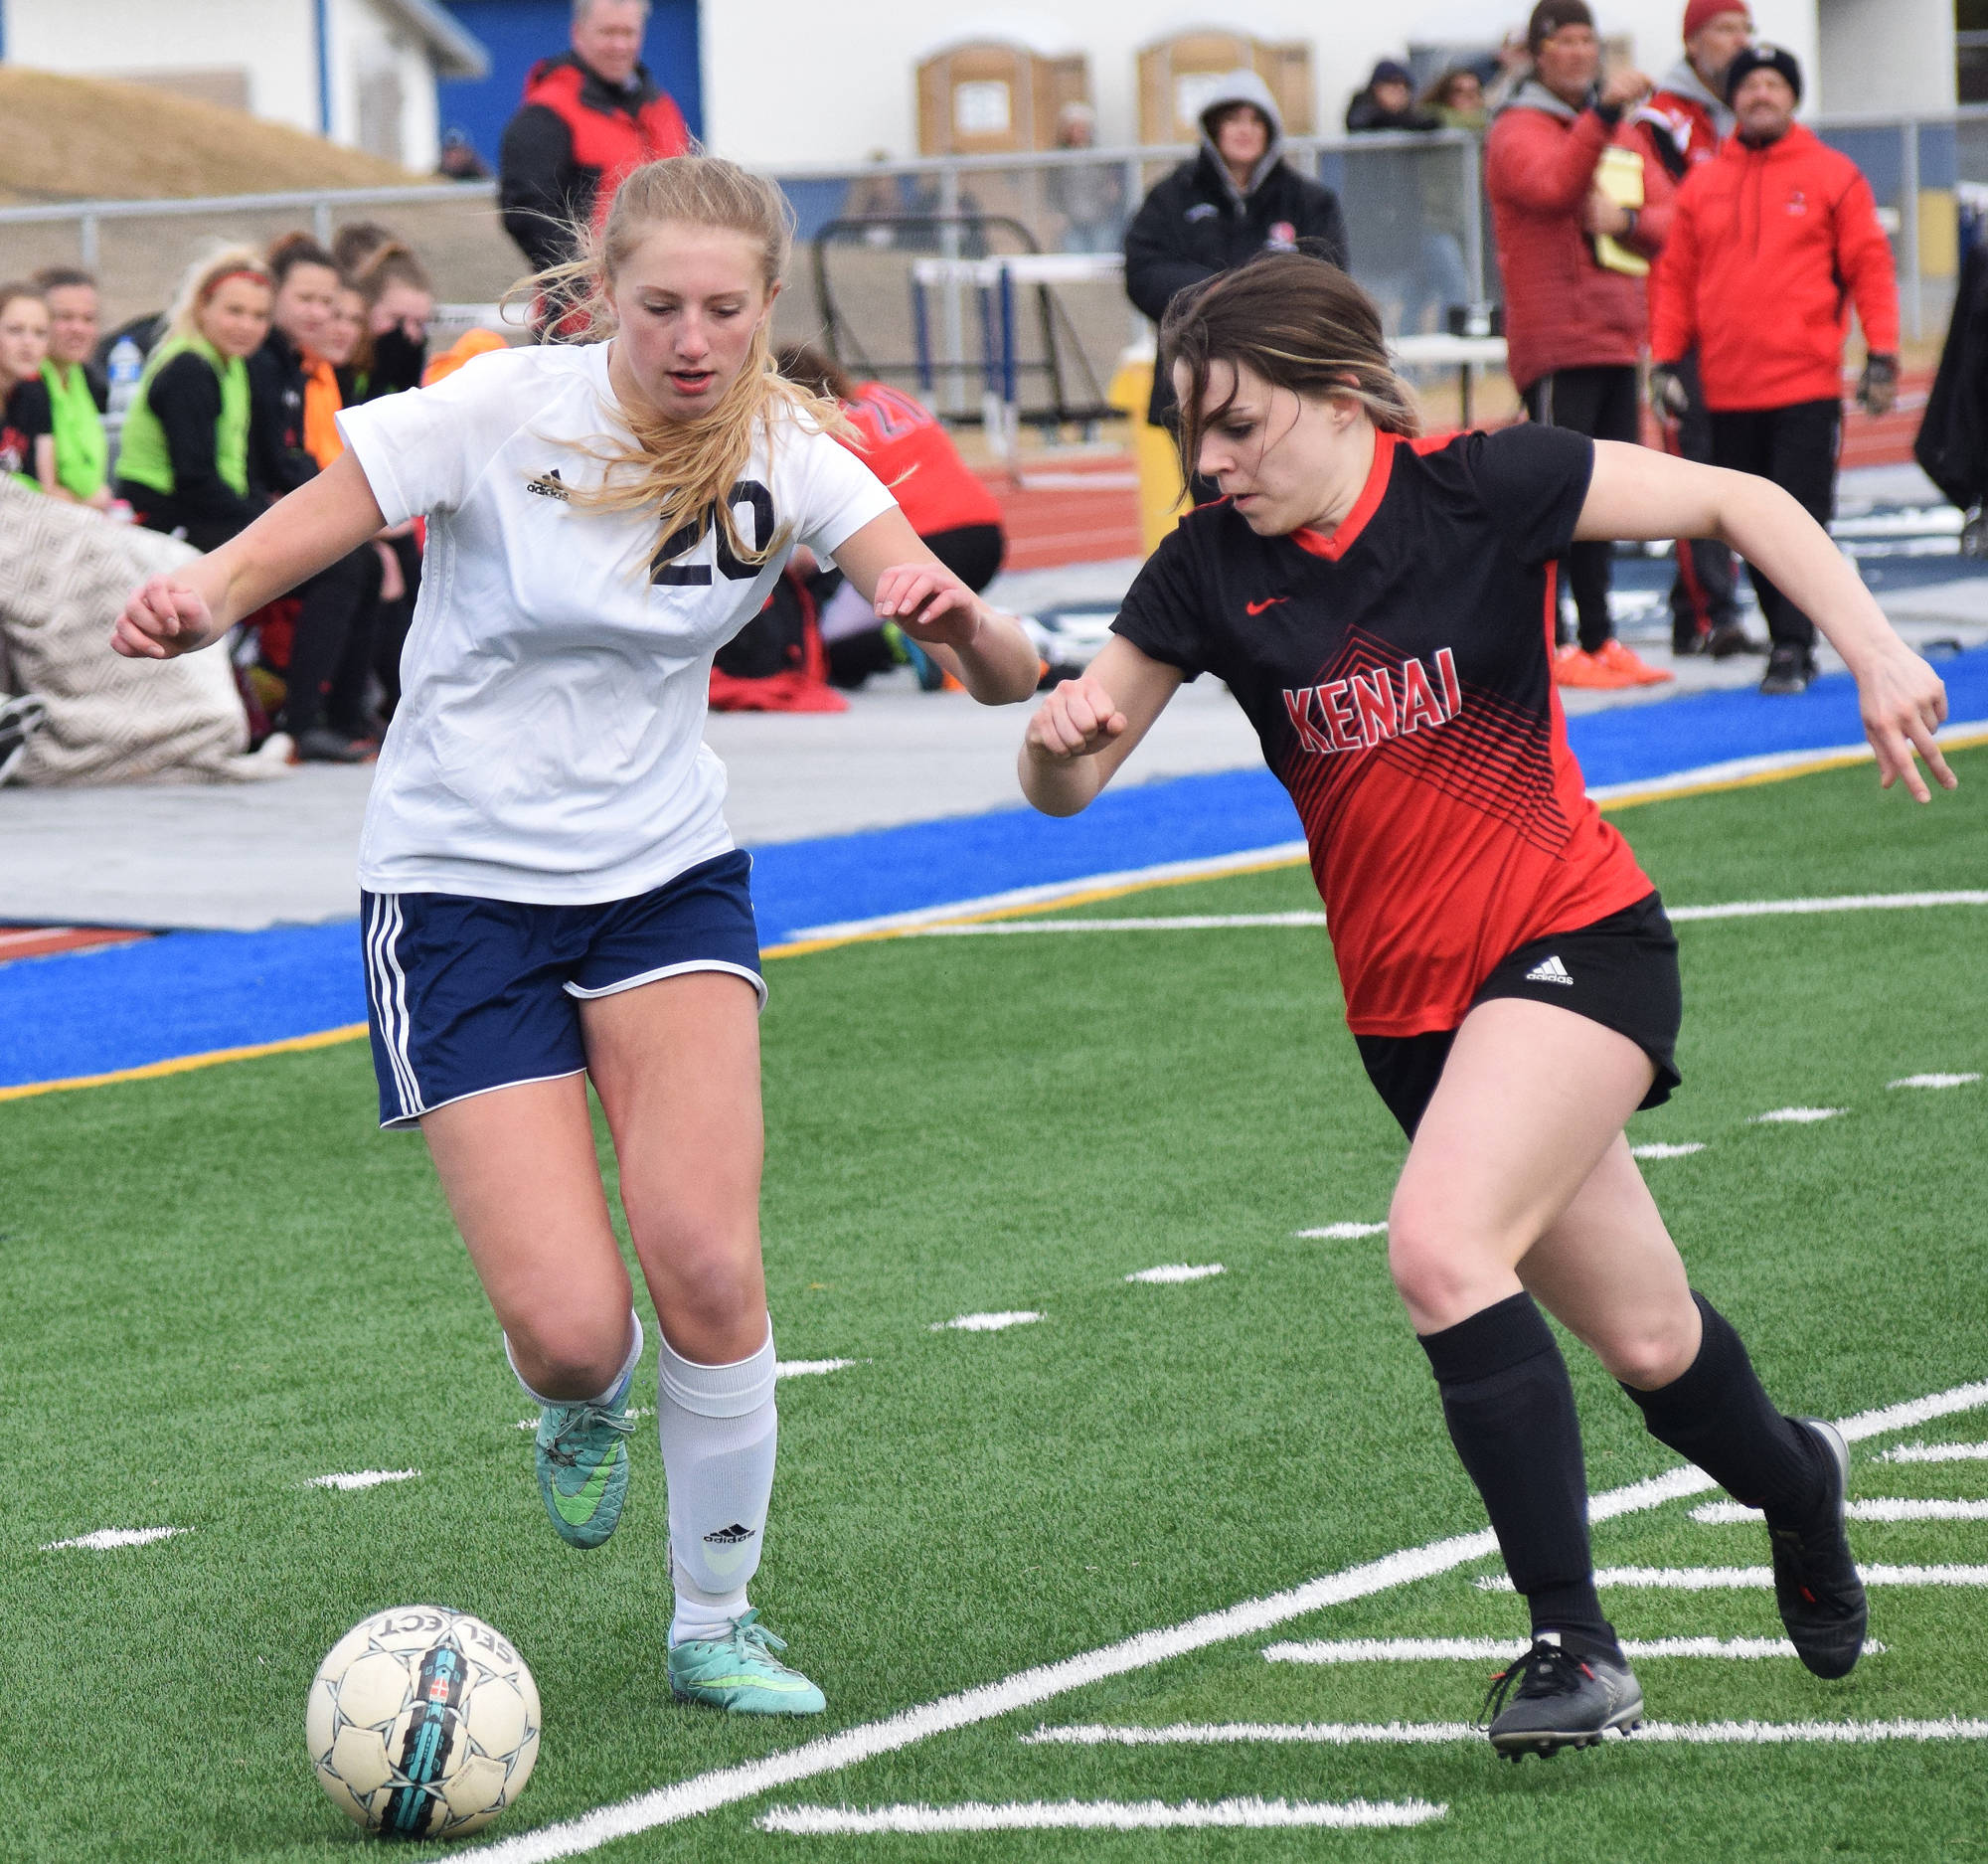 Soldotna’s Cameron Blackwell and Kenai’s Alissa Maw battle for the ball Tuesday at Justin Maile Field in Soldotna. (Photo by Joey Klecka/Peninsula Clarion)